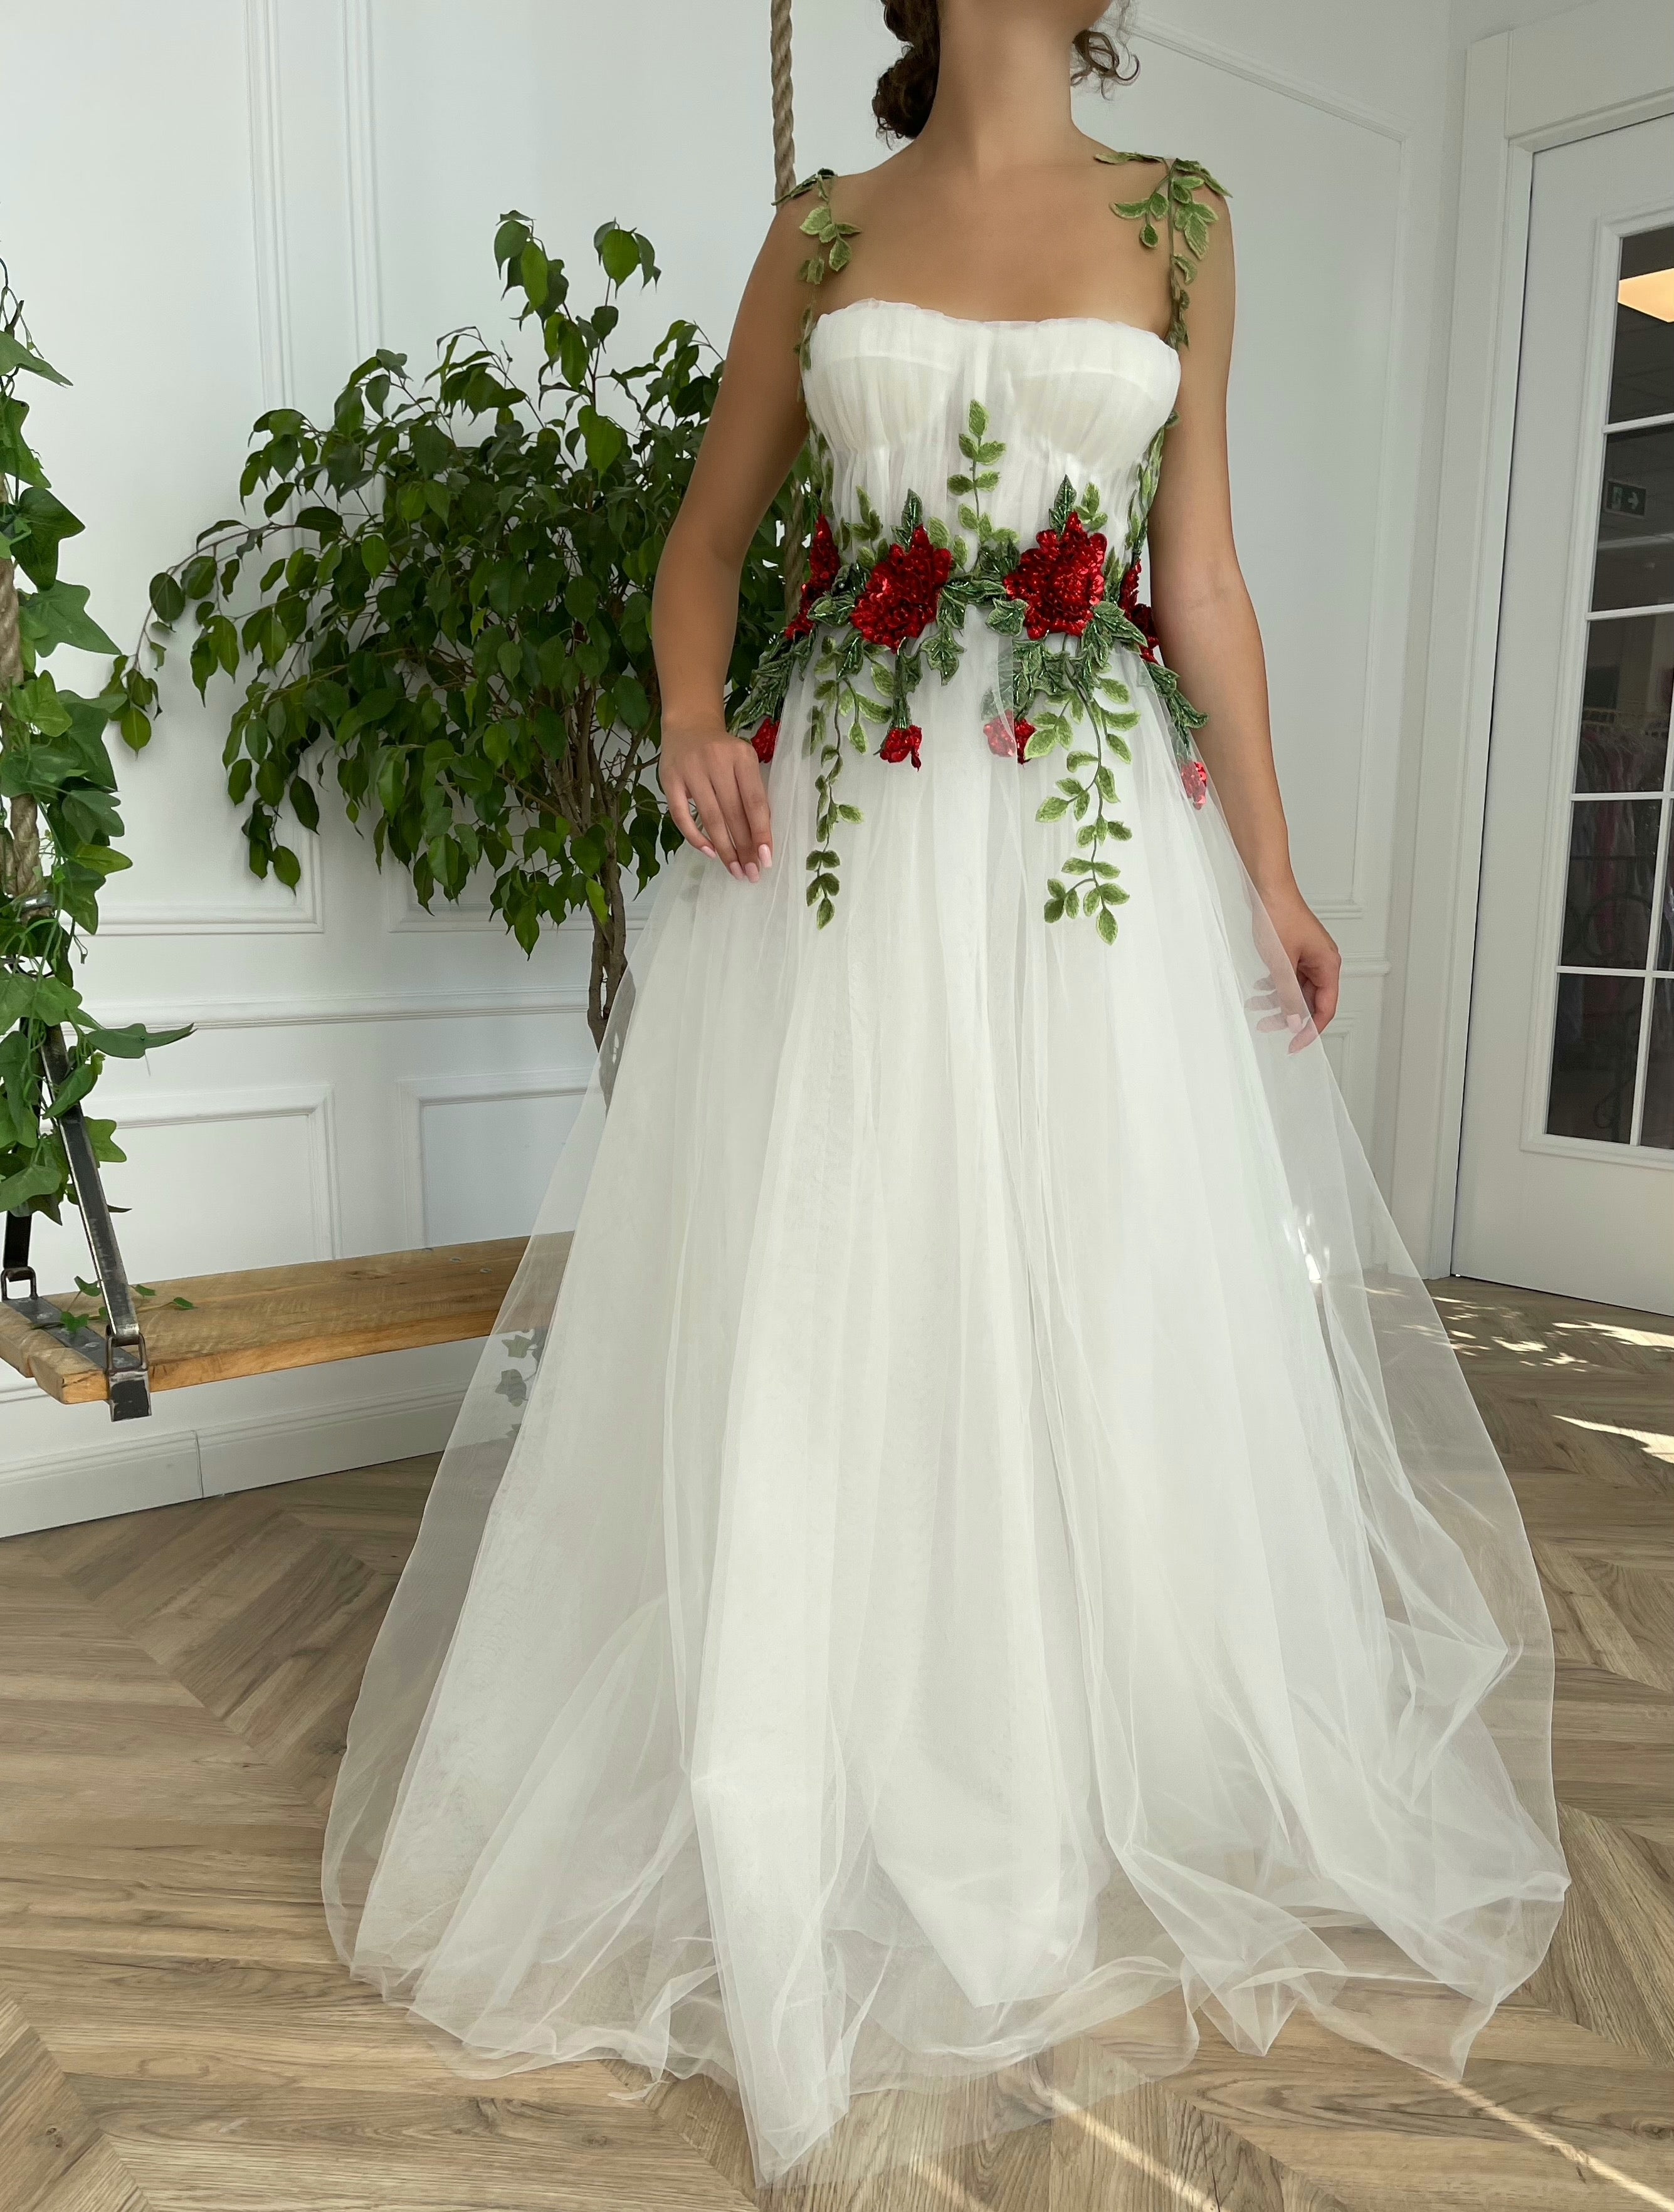 White A-Line bridal dress with embroidery and spaghetti straps